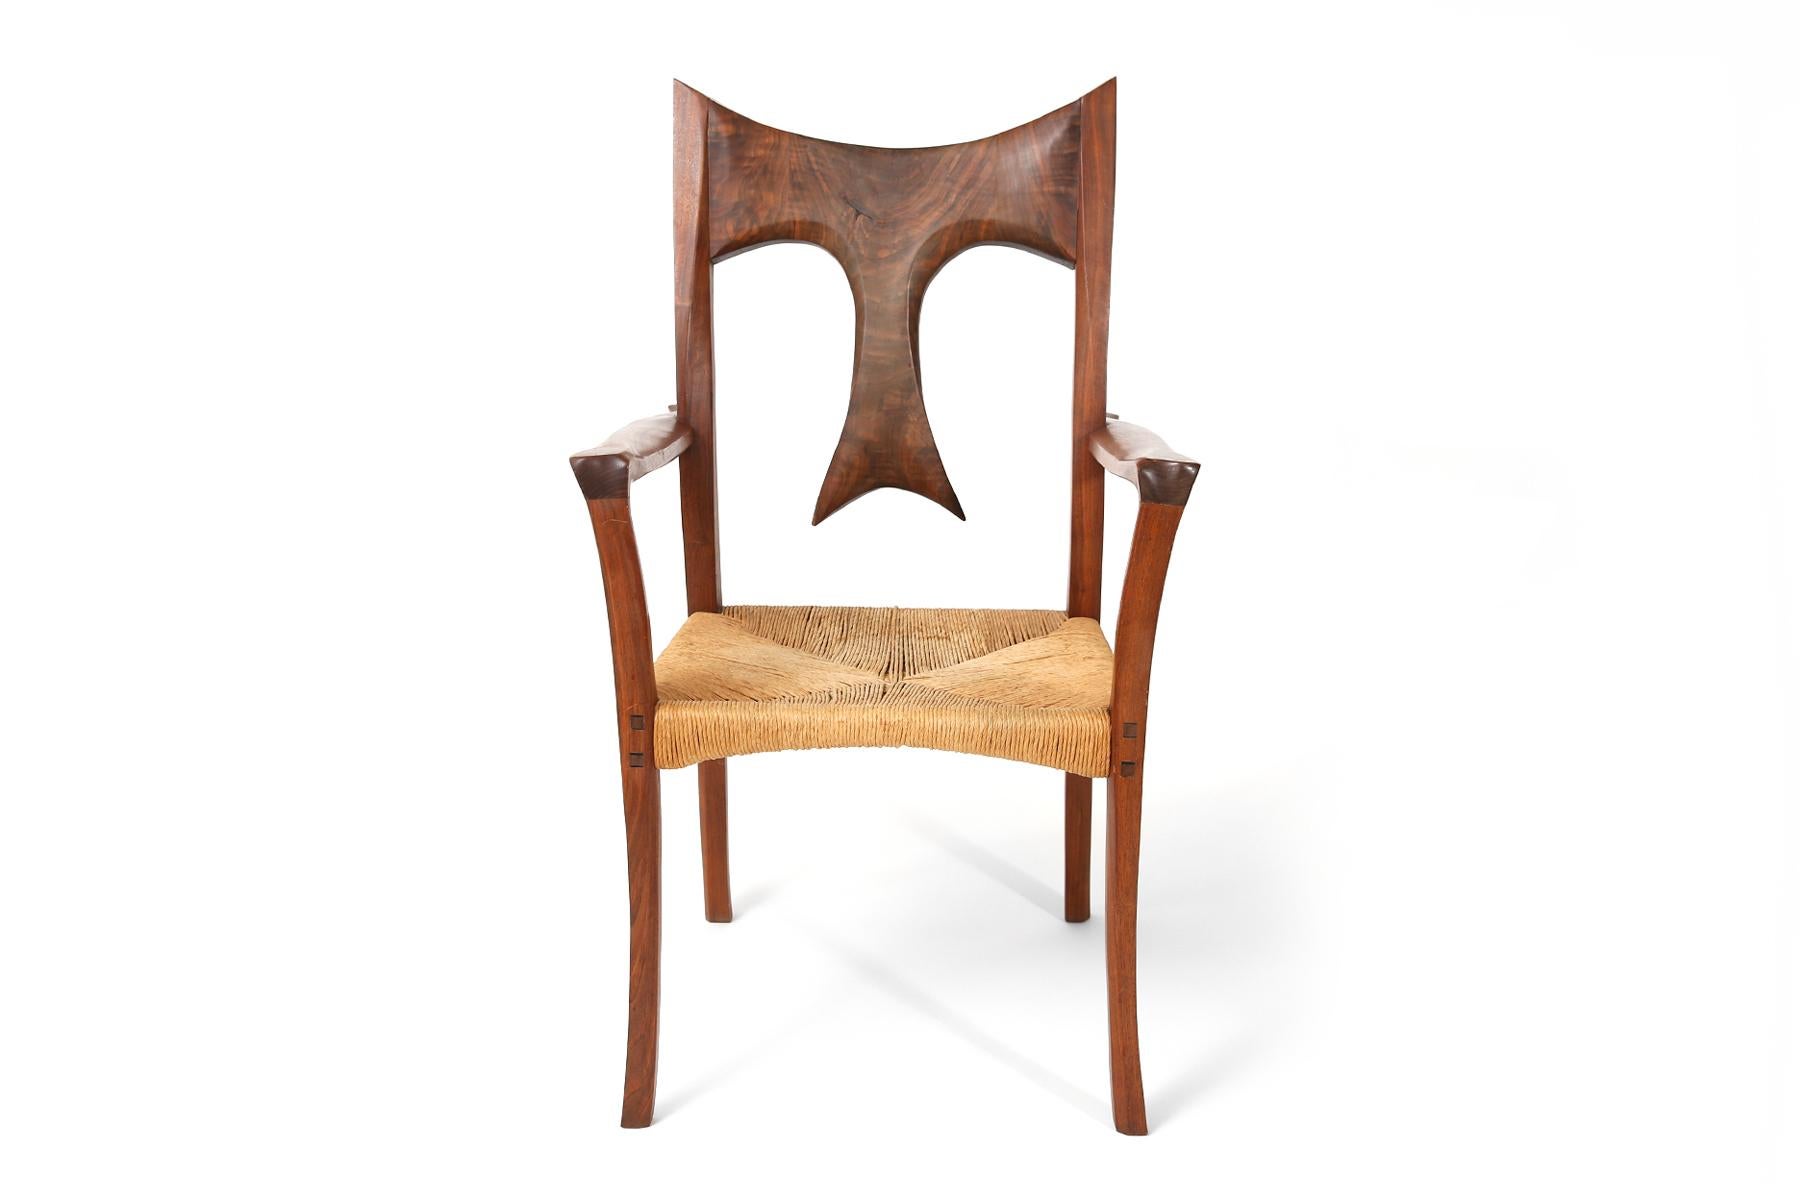 Stunning studio crafted solid walnut and raffia armchair, late circa 1970s. This sculptural example has an unusual handcrafted back, beautifully formed arms and masterful joinery.